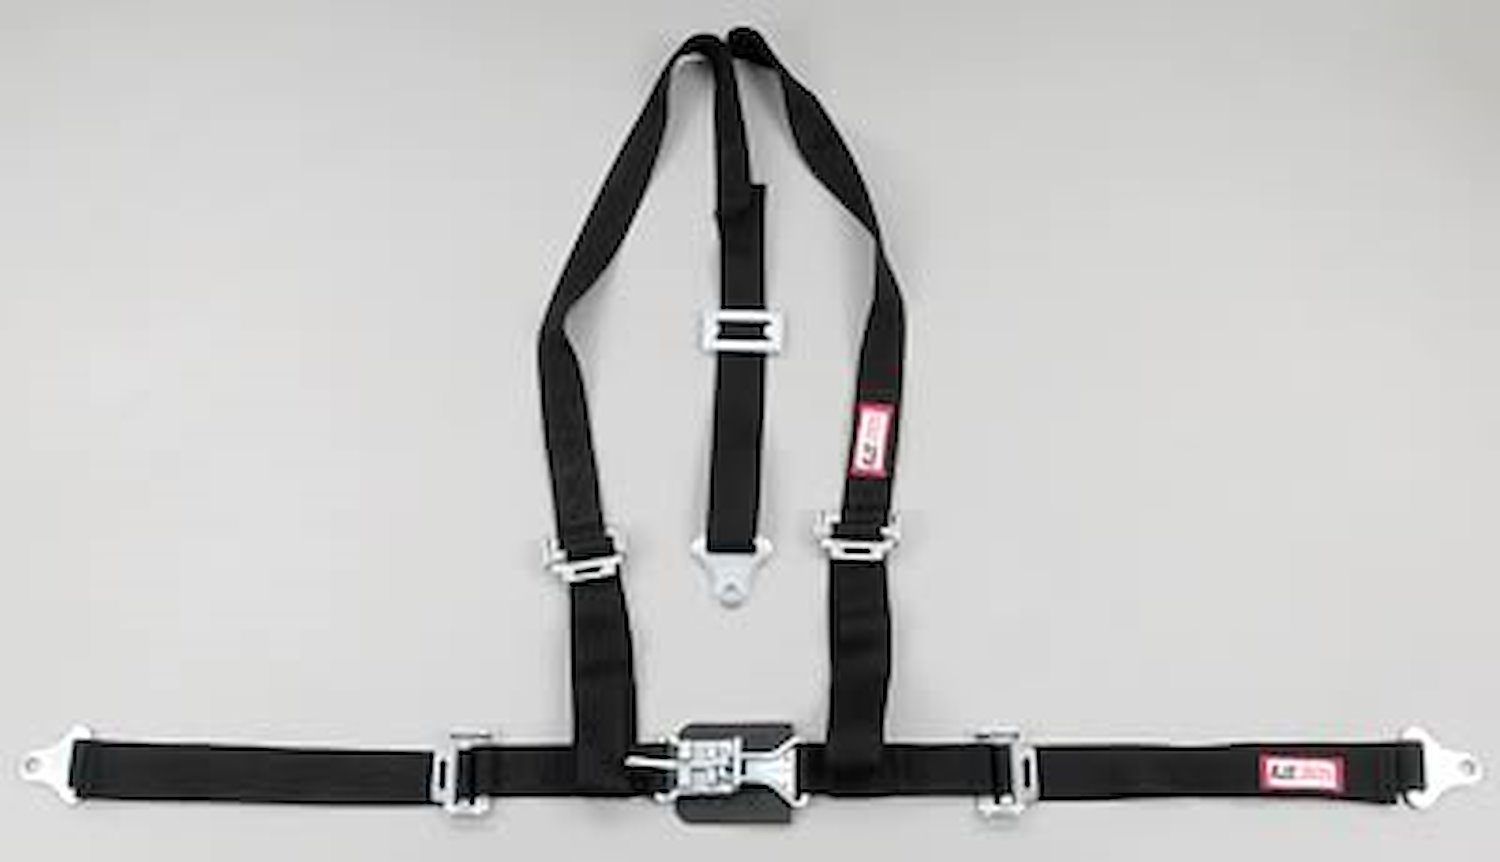 NON-SFI L&L HARNESS 2 PULL DOWN Lap Belt SNAP SEWN IN 2 S.H. V ROLL BAR Mount w/STERNUM STRAP BOLT RED